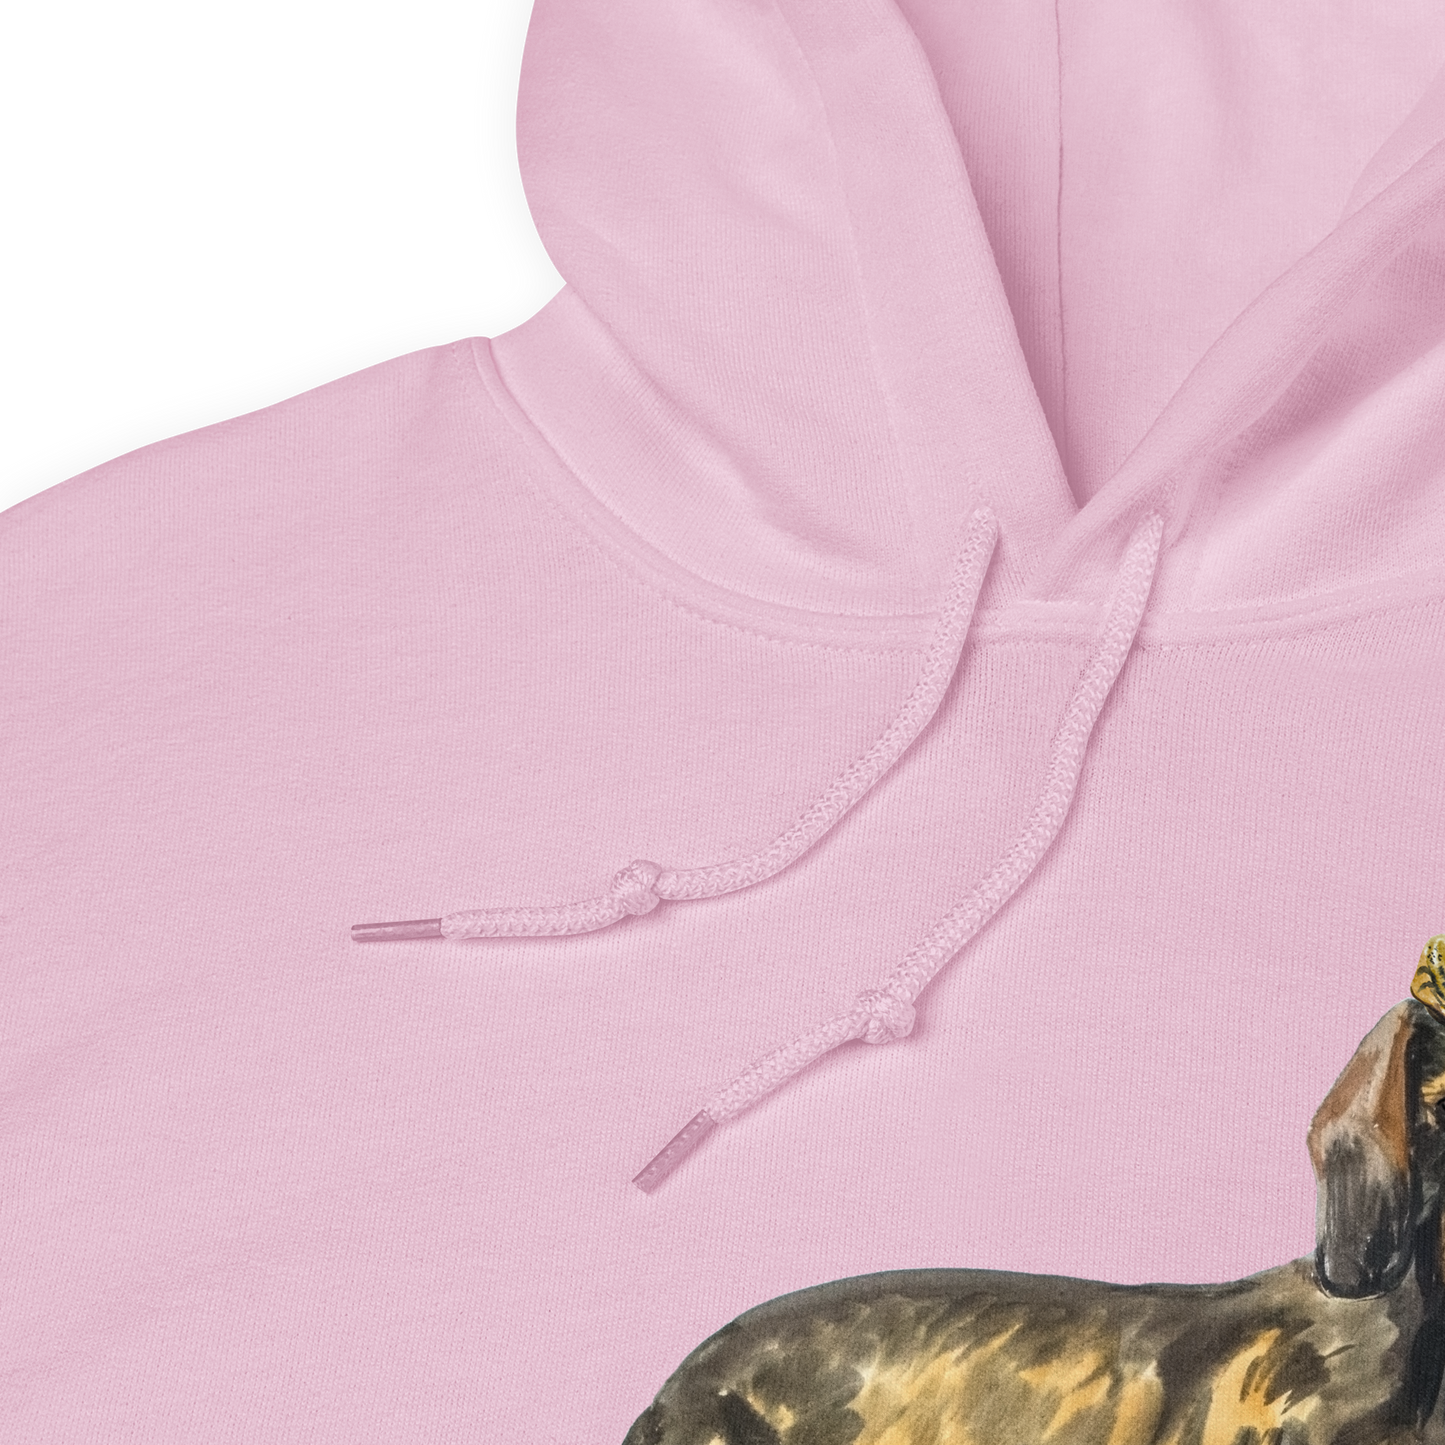 Product details of a Light Pink Dachshund Hoodie featuring an adorable Frog on a Dachshund's Head graphic on the chest - Cute Graphic Dachshund Hoodies - Boozy Fox